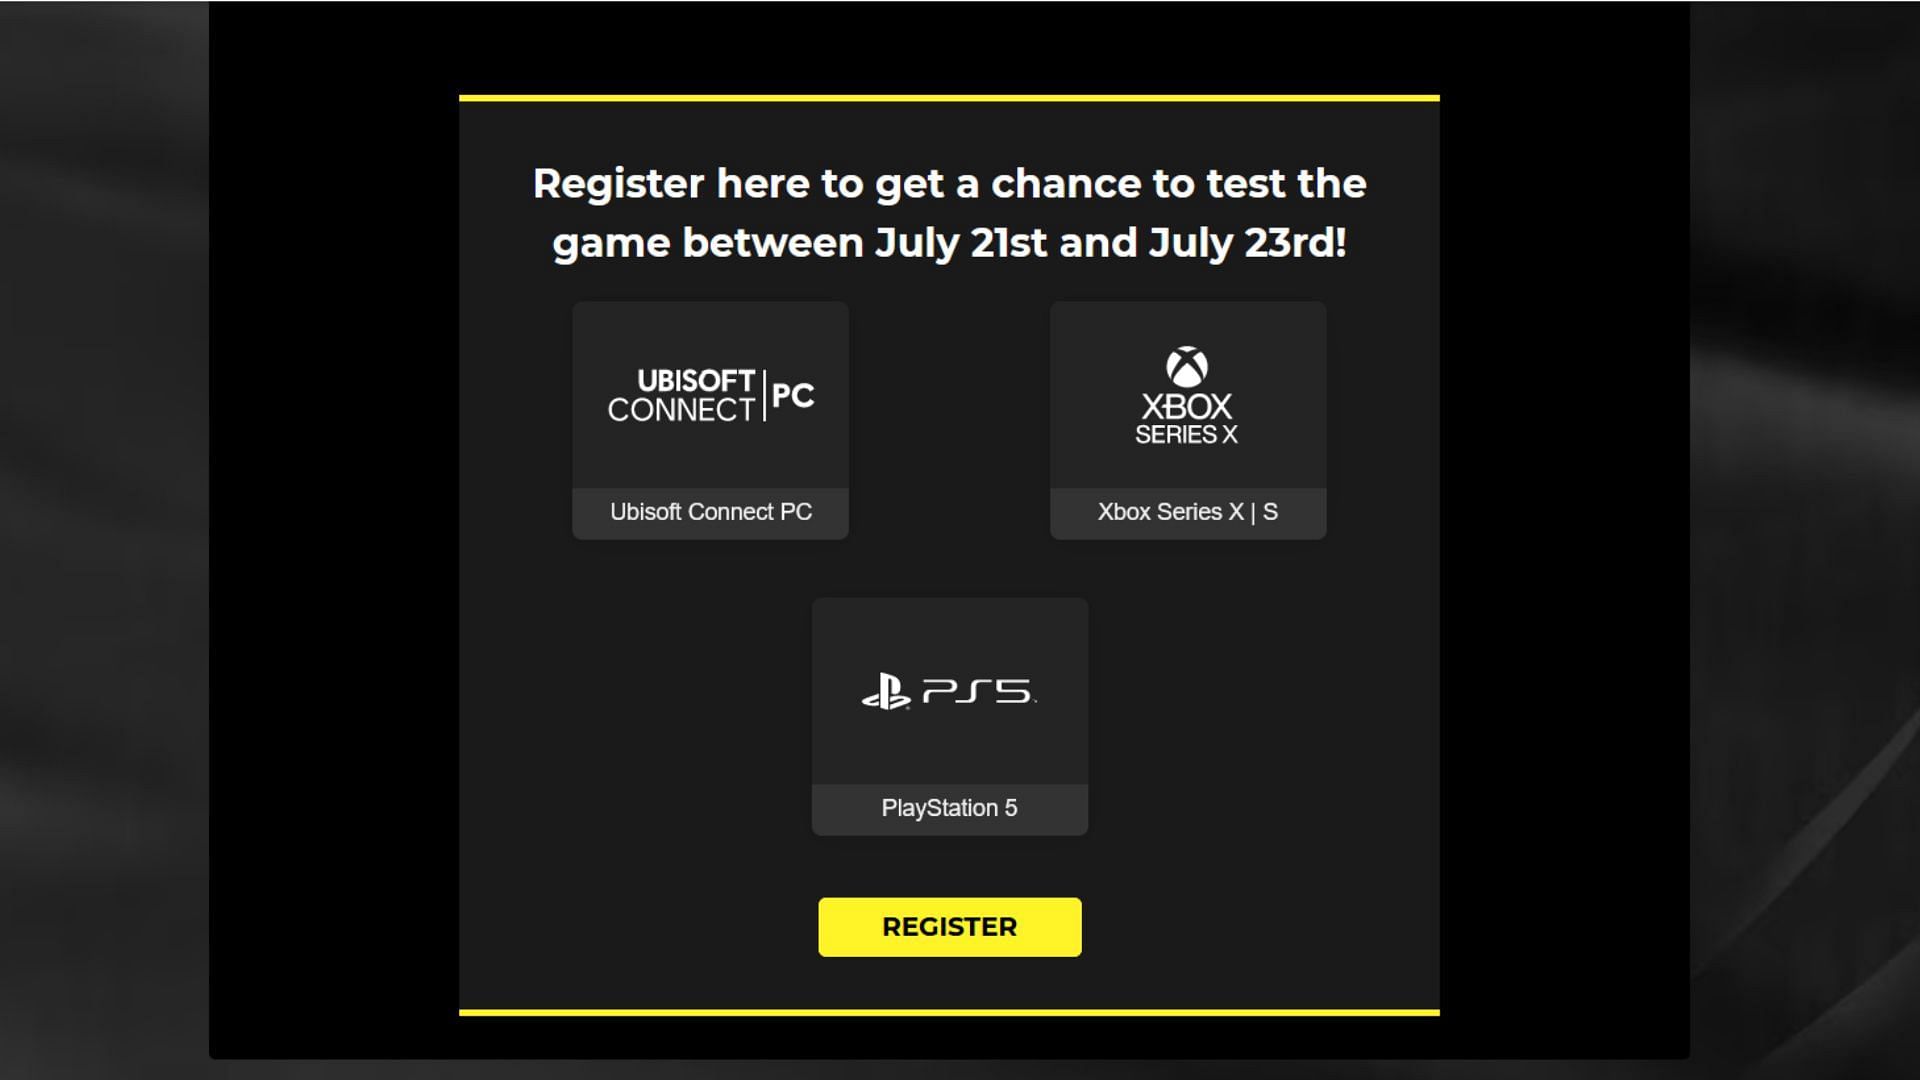 The Closed Beta test is available only for the users of PlayStation 5, Xbox Series X/S, and PC via Ubisoft Connect (Image via Ubisoft)